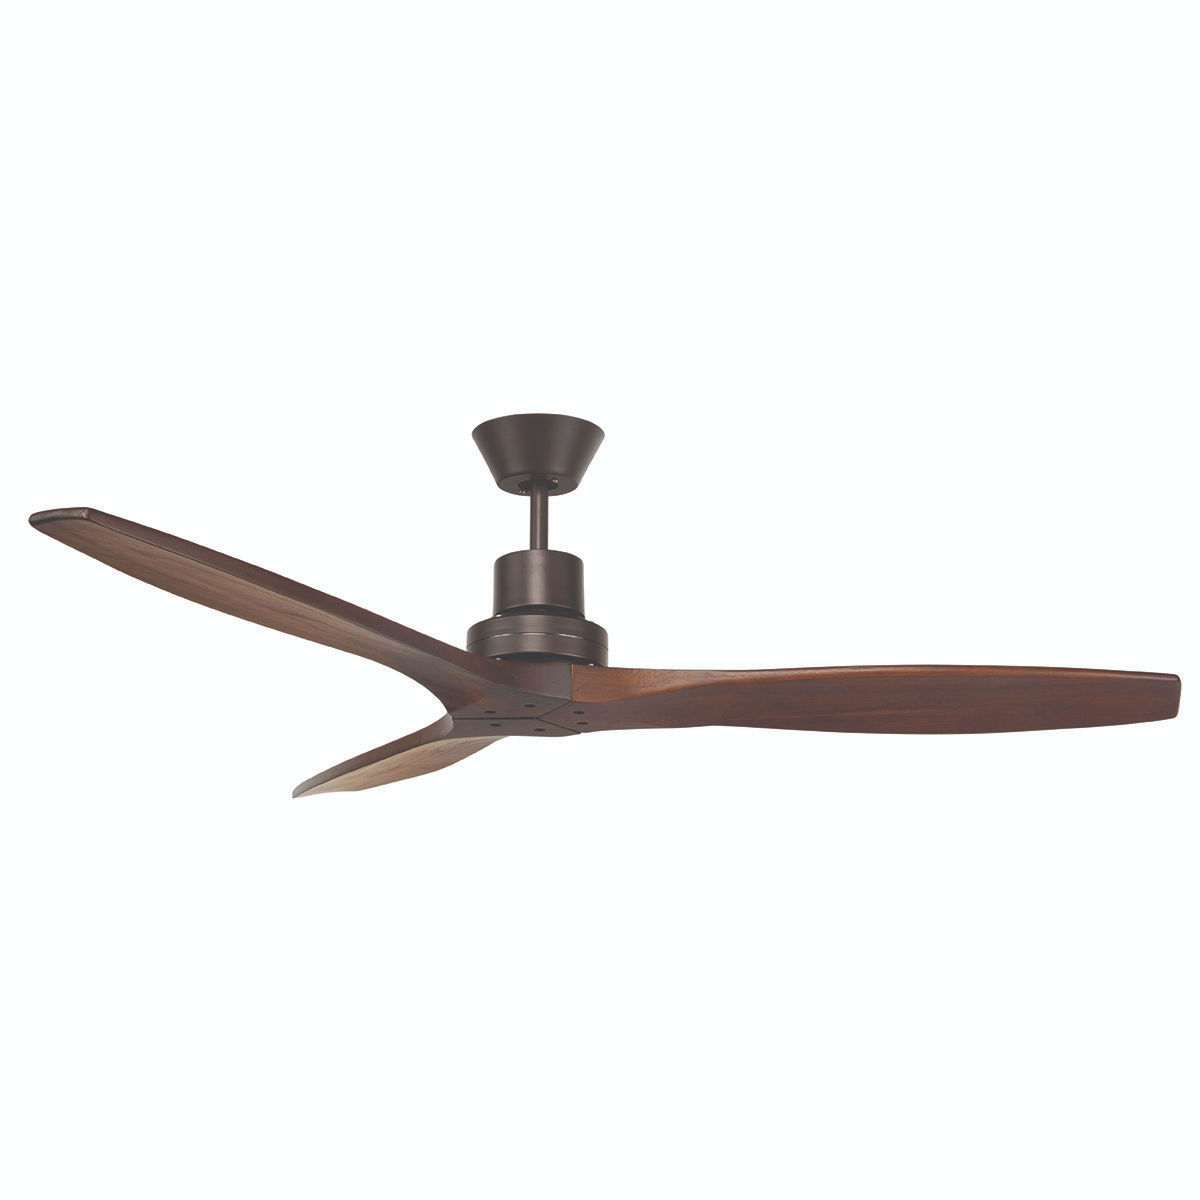 Product image of Mercury Ceiling Fan with Dark Timber Blades